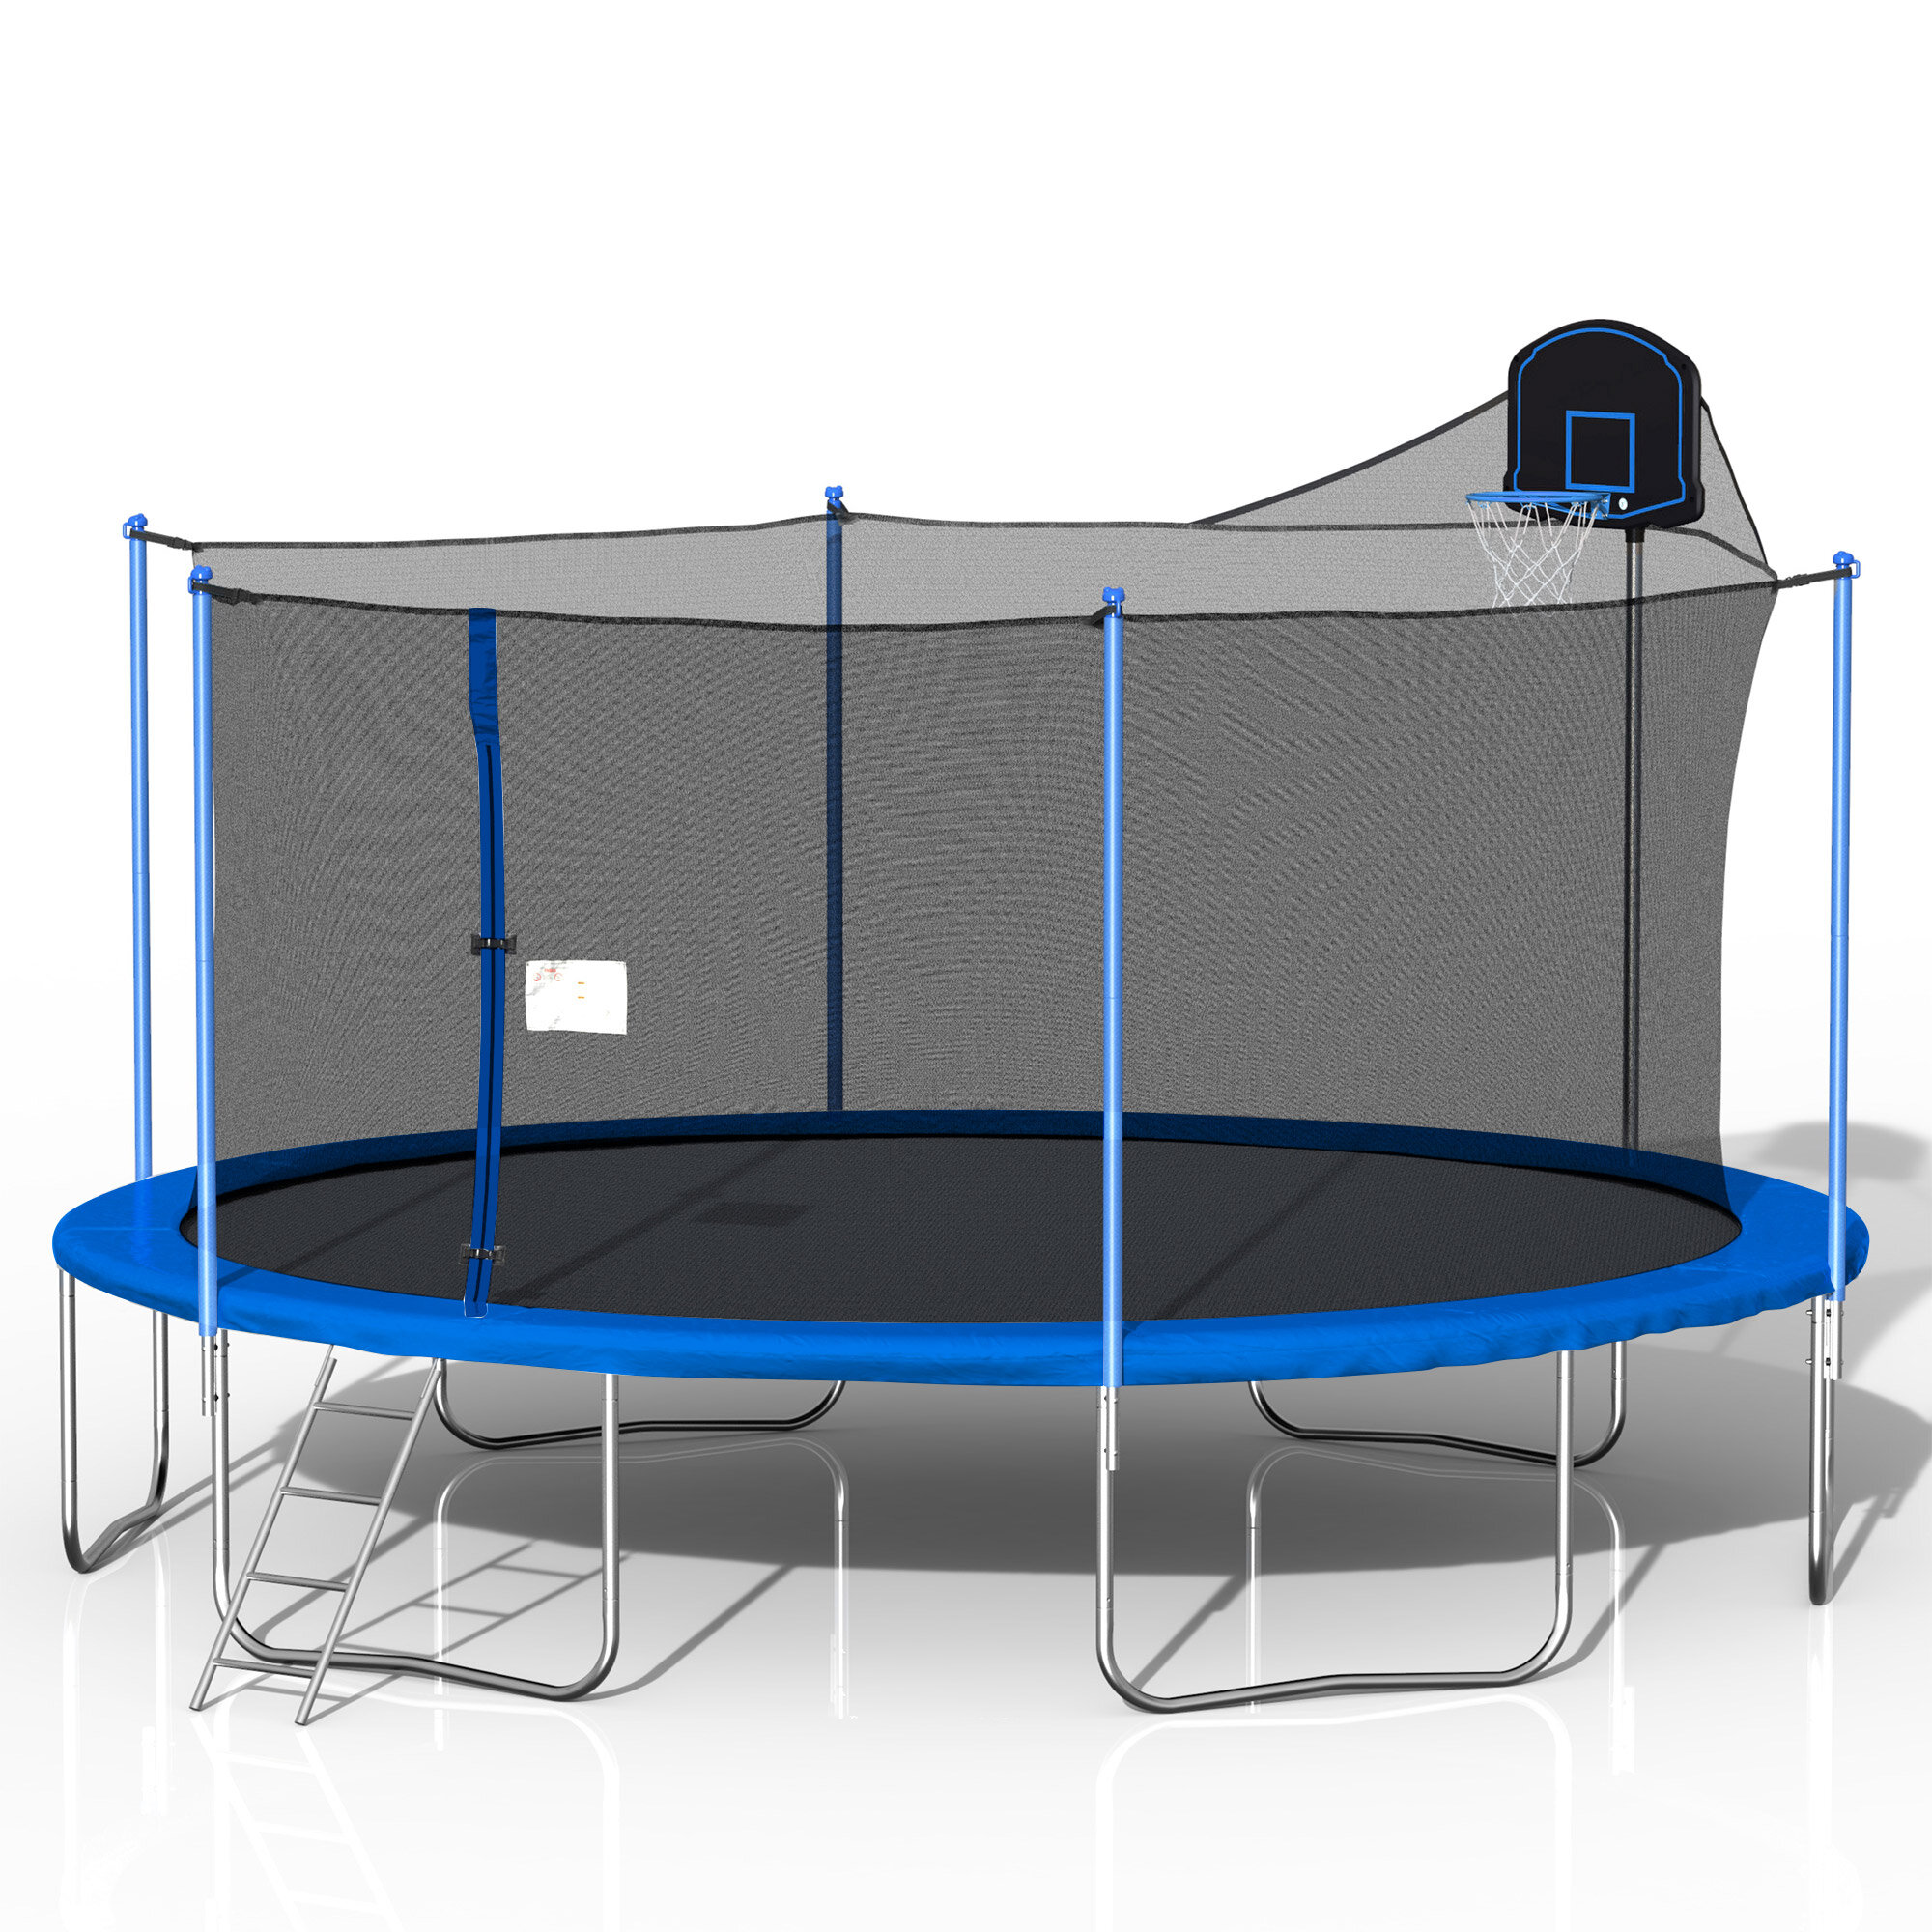 Image of [US Direct]Bominfit 16Inch Fitness Trampoline with Basketball Frame Aerobic Jump Training Gym Exercise Jump Kids Adult H